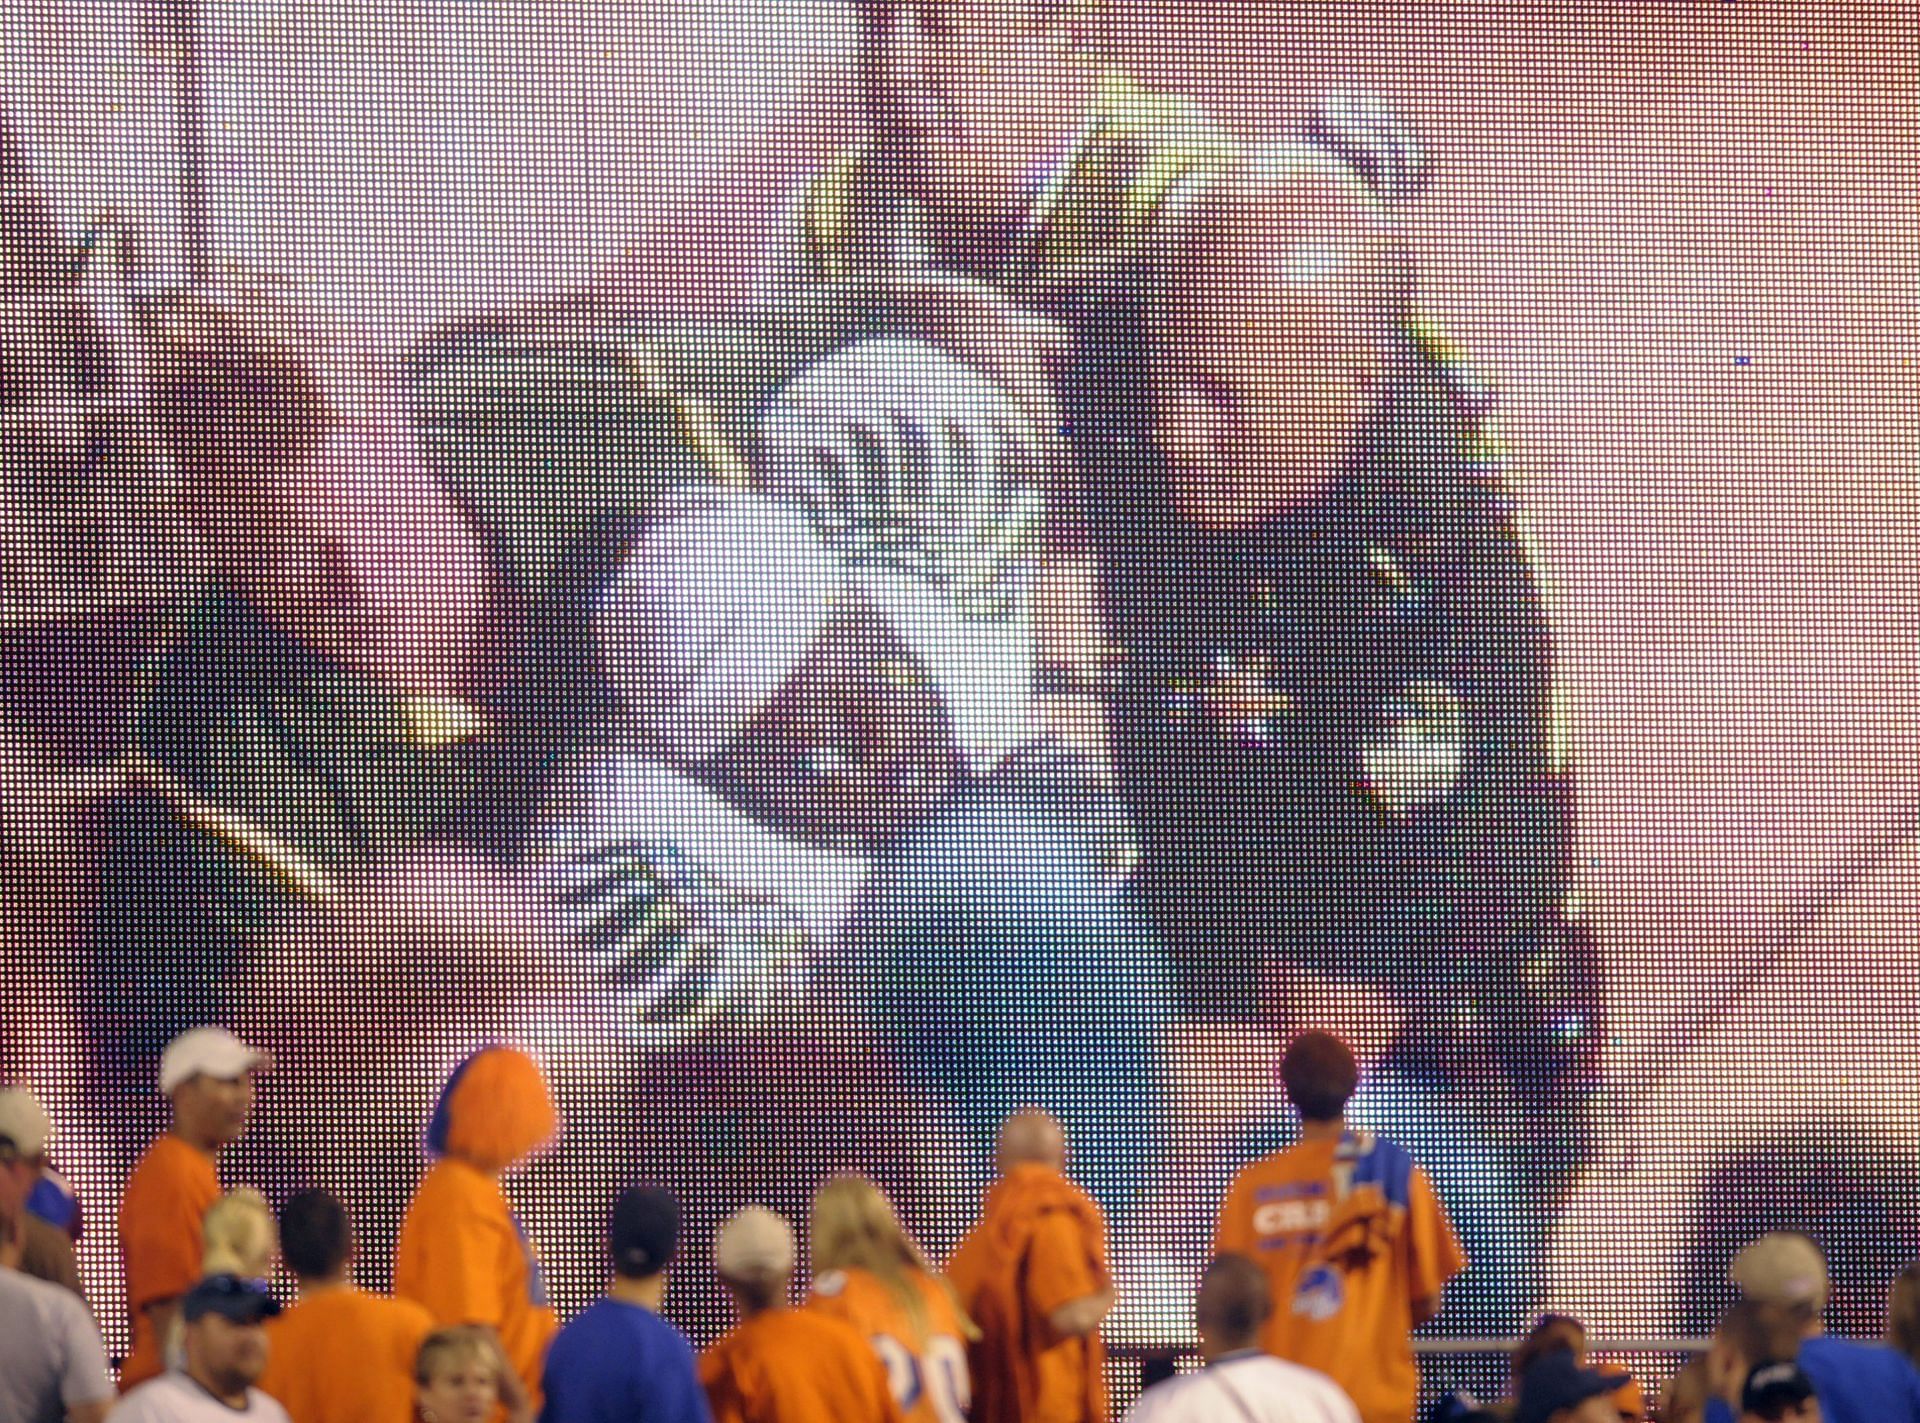 LeGarrette Blount being restrained after an incident with the Oregon Ducks in college